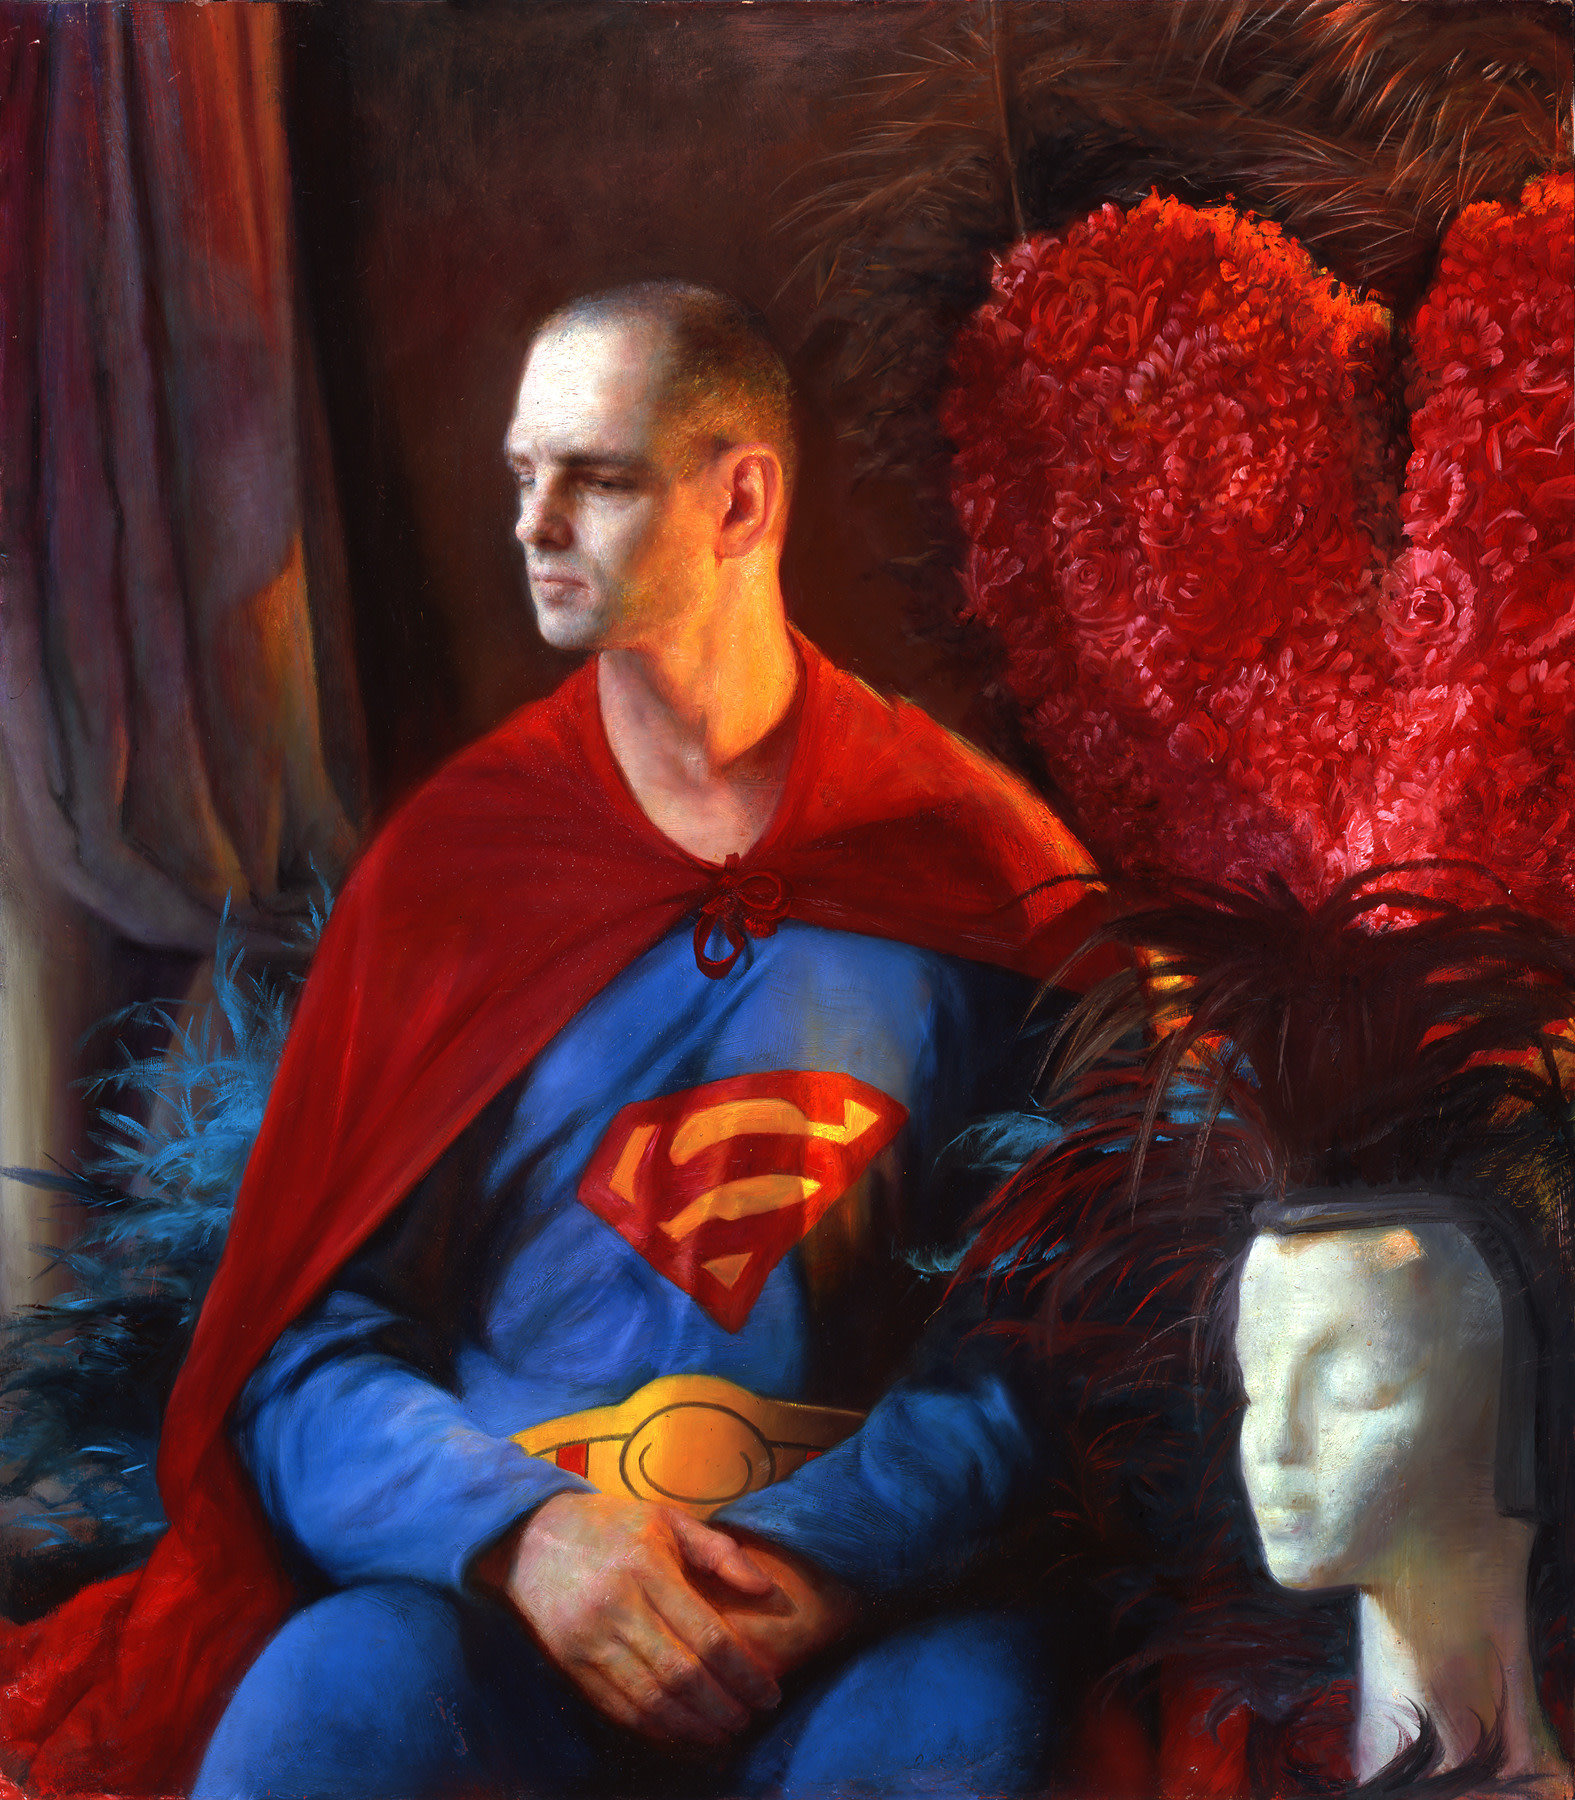 Steven Assael, Untitled (Superman) (SOLD), 2006, oil on canvas, 40 x 30 inches